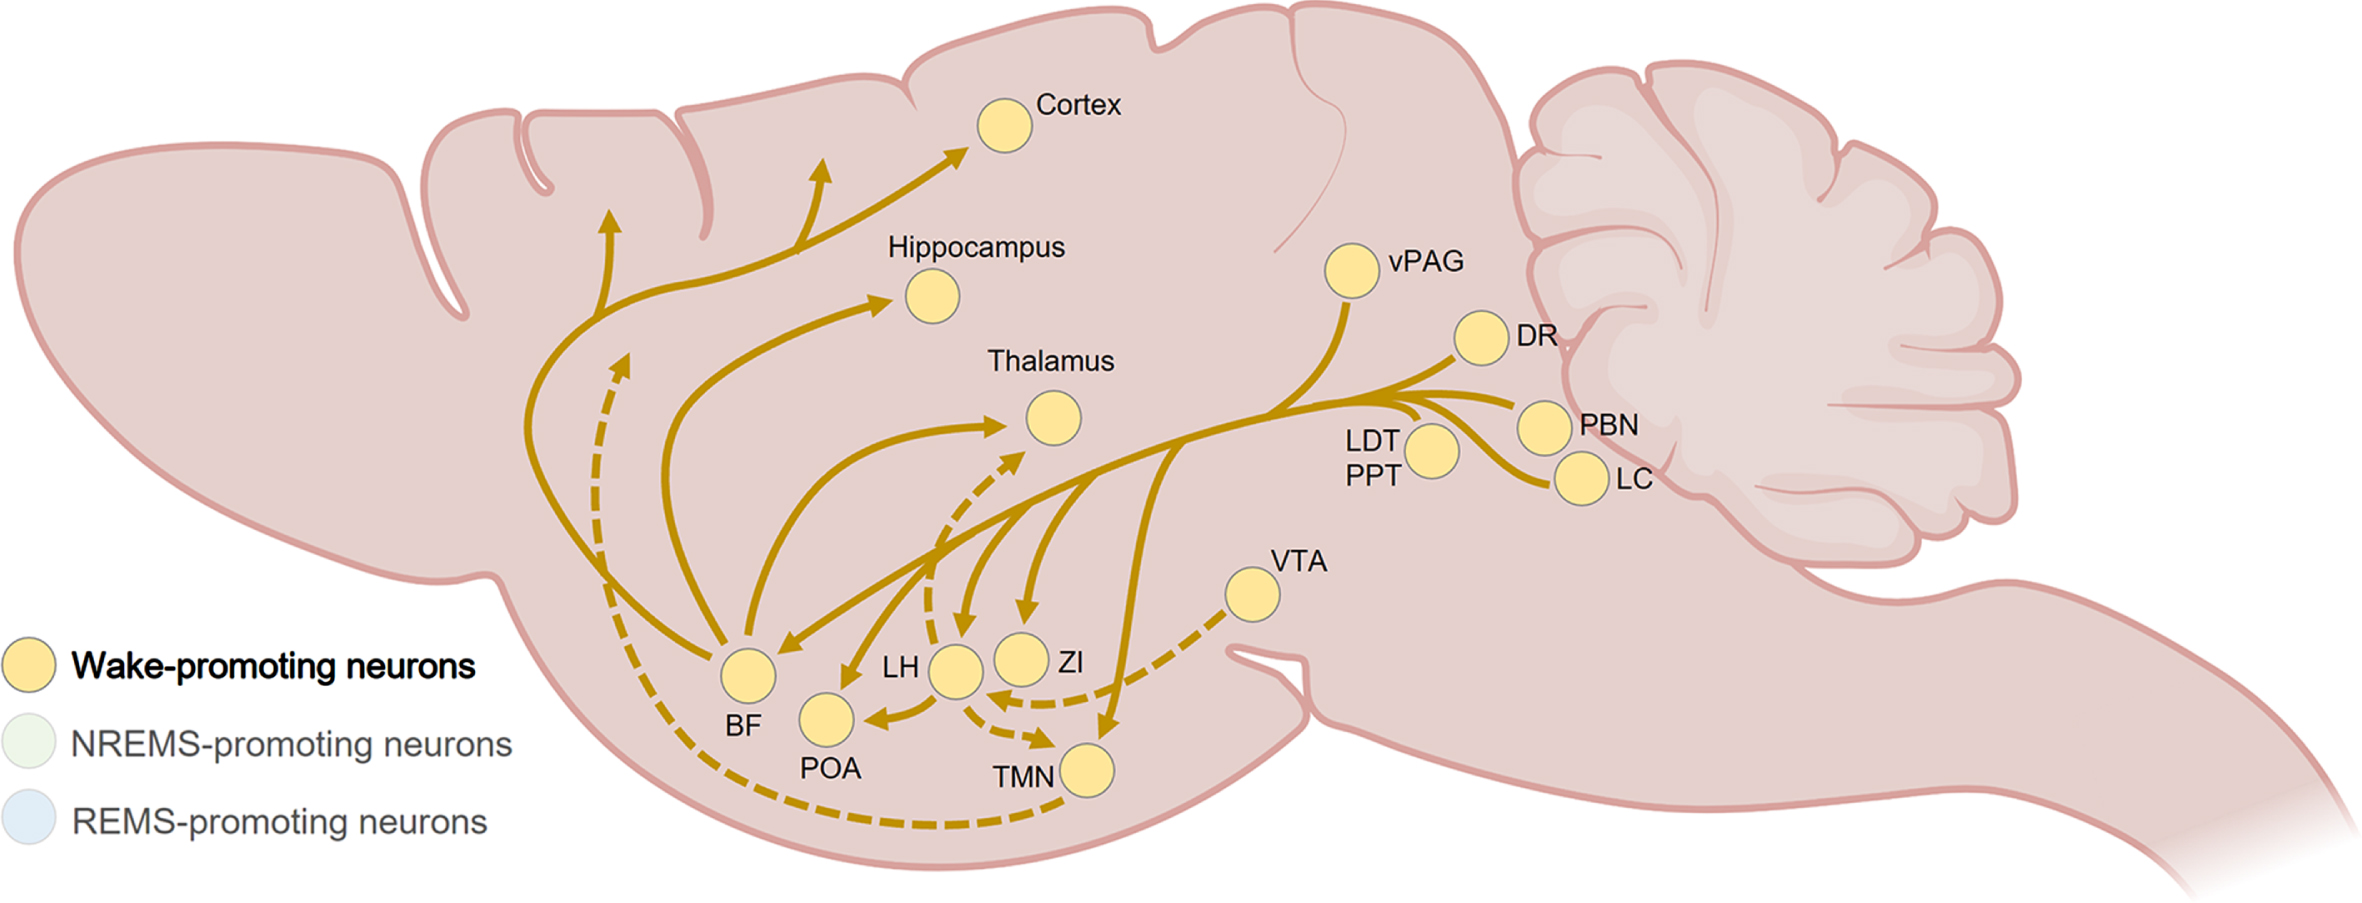 Summary of the wake-promoting pathways in the rodent brain. Wakefulness is mainly generated by fast-acting glutamatergic projections from the brainstem (e.g., PBN, LDT, PPT) to the BF and hypothalamic nuclei (e.g., PAO, LH), as well as widespread-projecting monoaminergic neurons from the LC, DR, and vPAG. The BF promotes arousal through GABAergic, cholinergic, and glutamatergic projections to the thalamus, hypothalamus, and cortex. The LH generates and maintain wakefulness mainly through innervations of the thalamus, POA and TMN. Wake-modulating pathways from the hypothalamus and VTA are shown with dashed lines. BF, basal forebrain; DR, dorsal raphe; LC, locus coeruleus; LDT, laterodorsal tegmental nucleus; LH, lateral hypothalamus; PBN, parabrachial nucleus; POA, preoptic area of the hypothalamus; PPT, pedunculopontine tegmental nucleus; TMN, tuberomammillary nucleus of the hypothalamus; vPAG, ventral periaqueductal gray; VTA, ventral tegmental area; ZI, zona incerta. Created with BioRender.com.